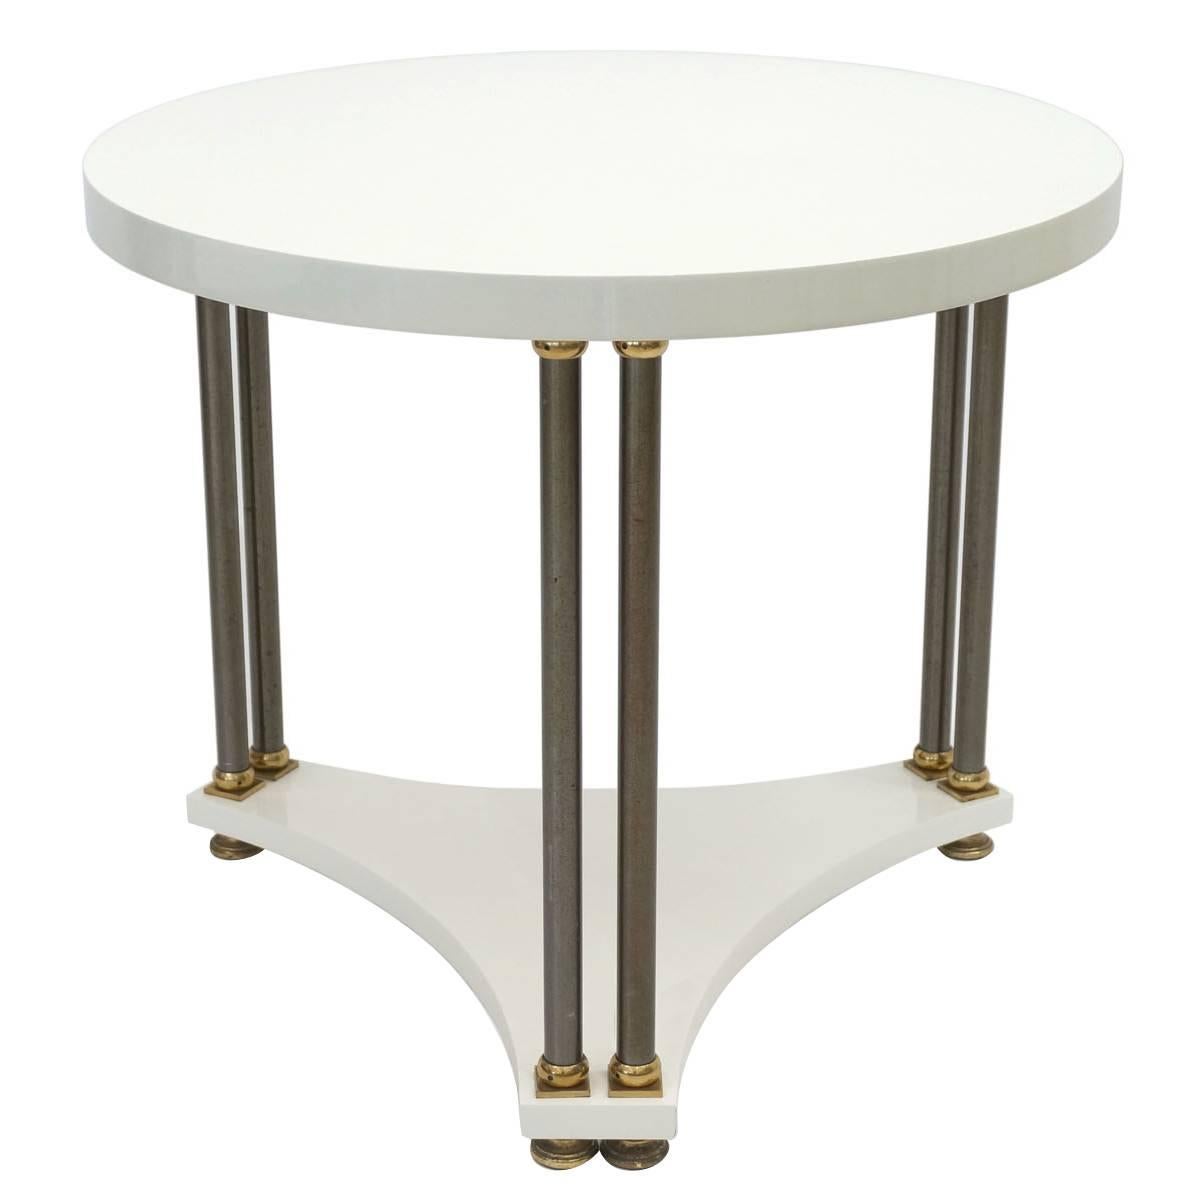 Round 1940s White Lacquer Side Table with Brass Legs, in the Manner of Jansen